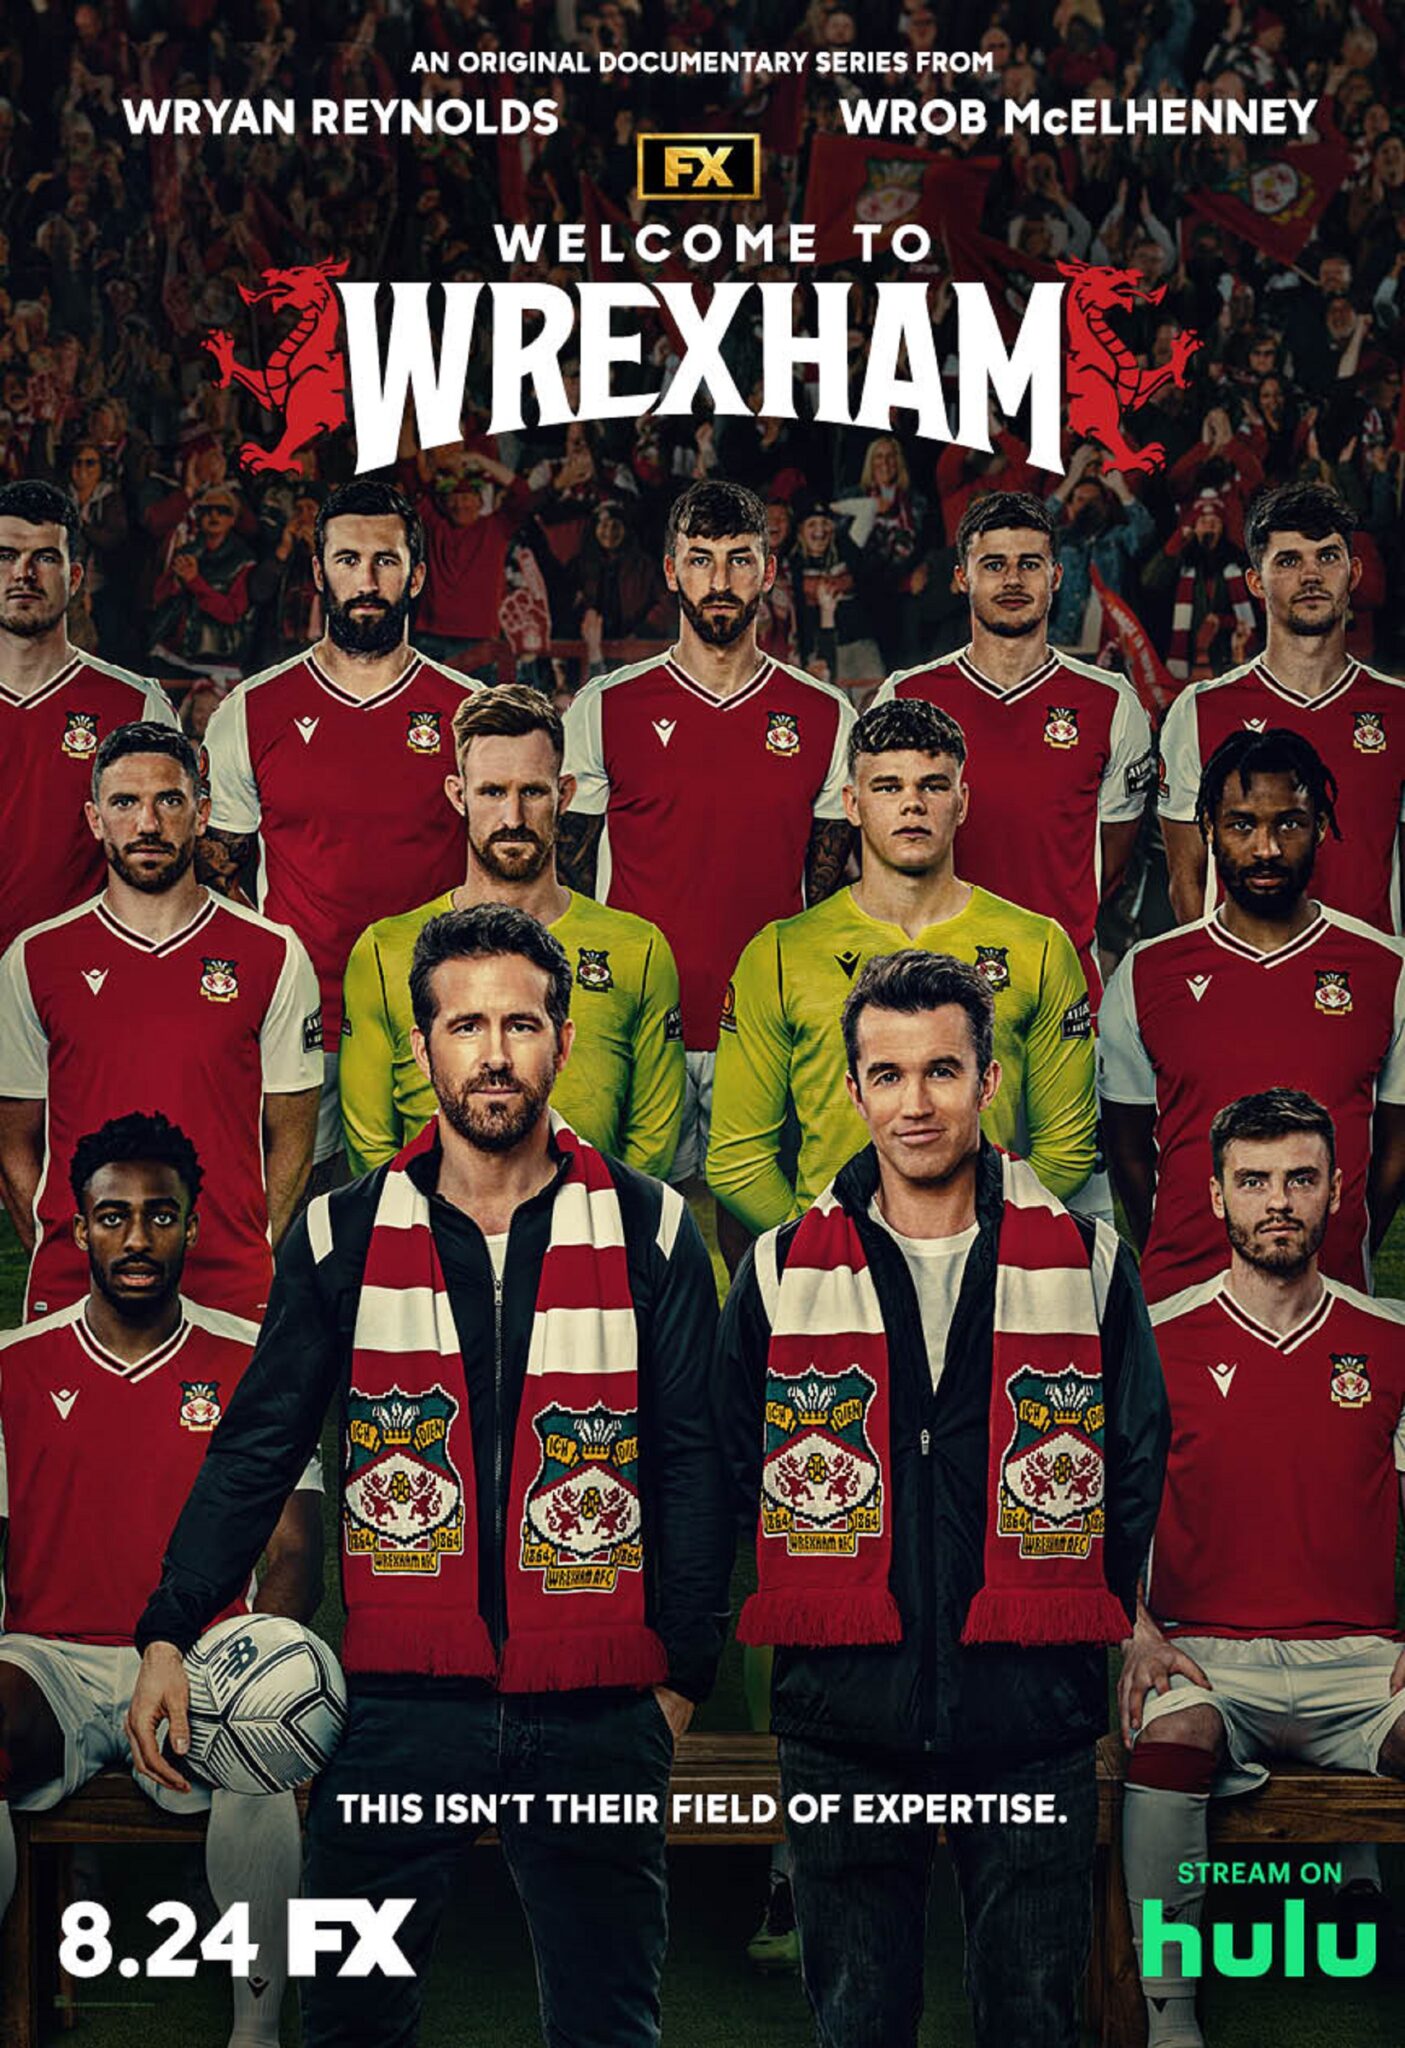 Welcome To Wrexham Trailer Ryan Reynolds And Rob Mcelhenney Buy A Football Club Video 